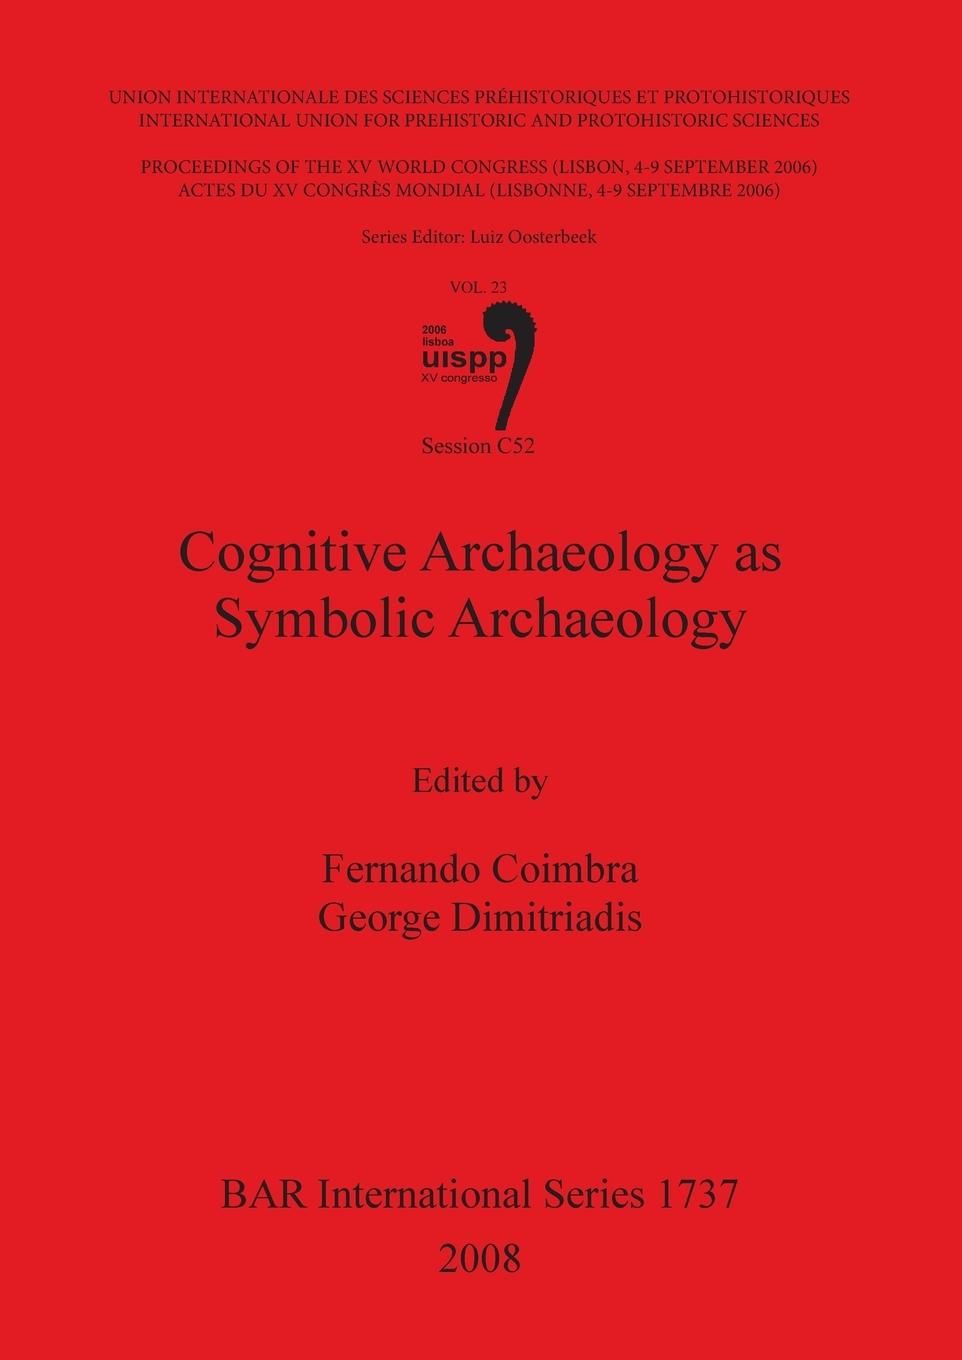 Cognitive Archaeology as Symbolic Archaeology Bar Is1737 - Coimbra, Fernando; Dimitriadis, George